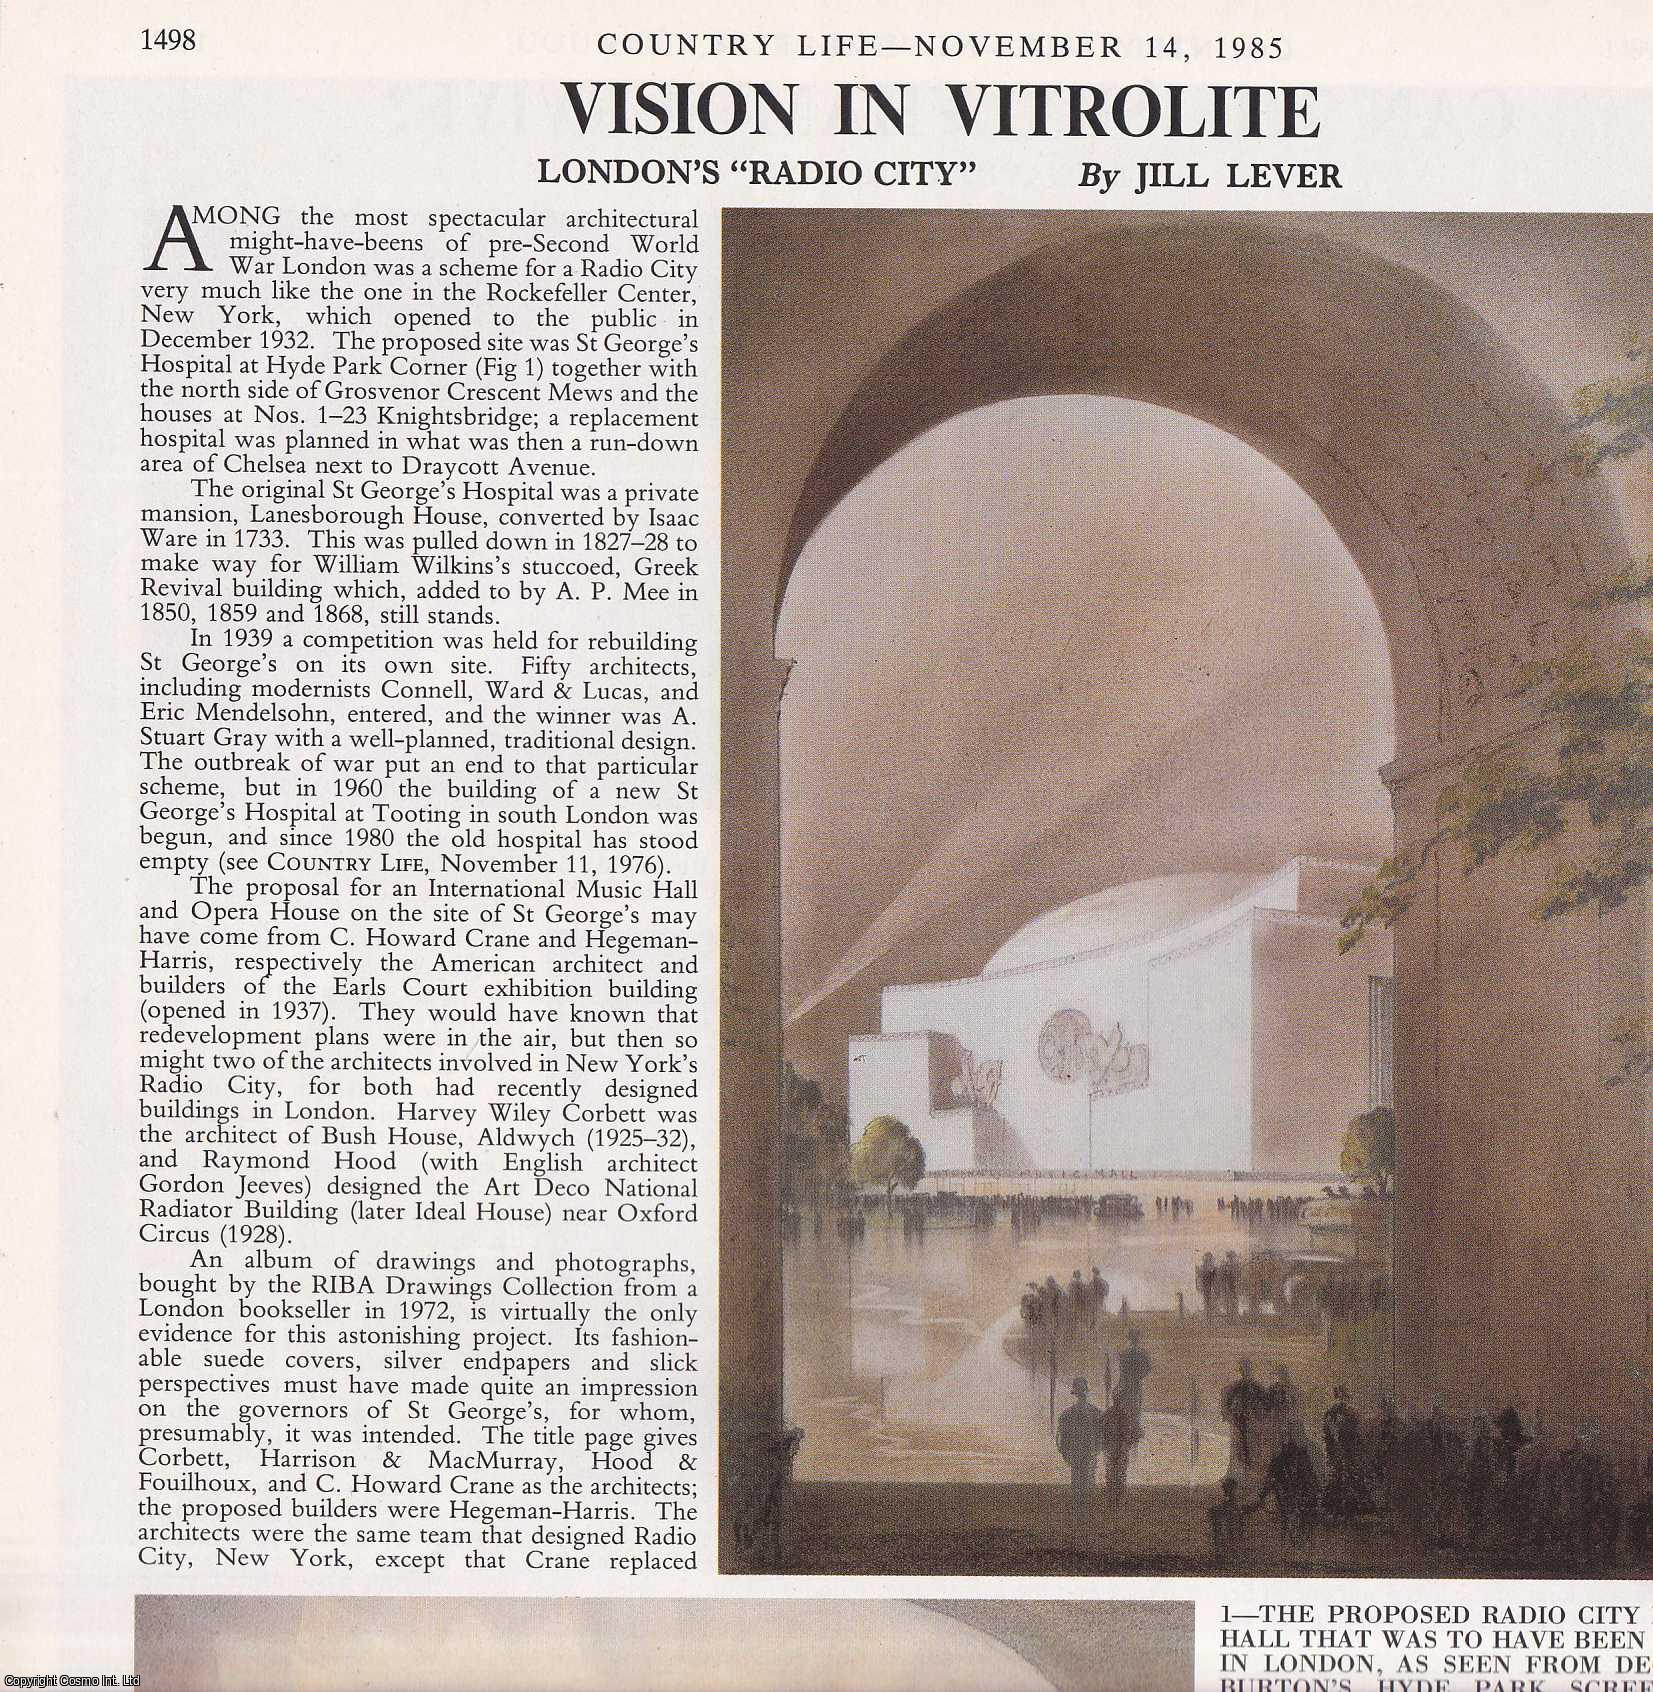 Jill Lever - The Proposed (Pre-War) Radio City Music Hall for London's Hyde Park Corner. Several pictures and accompanying text, removed from an original issue of Country Life Magazine, 1985.